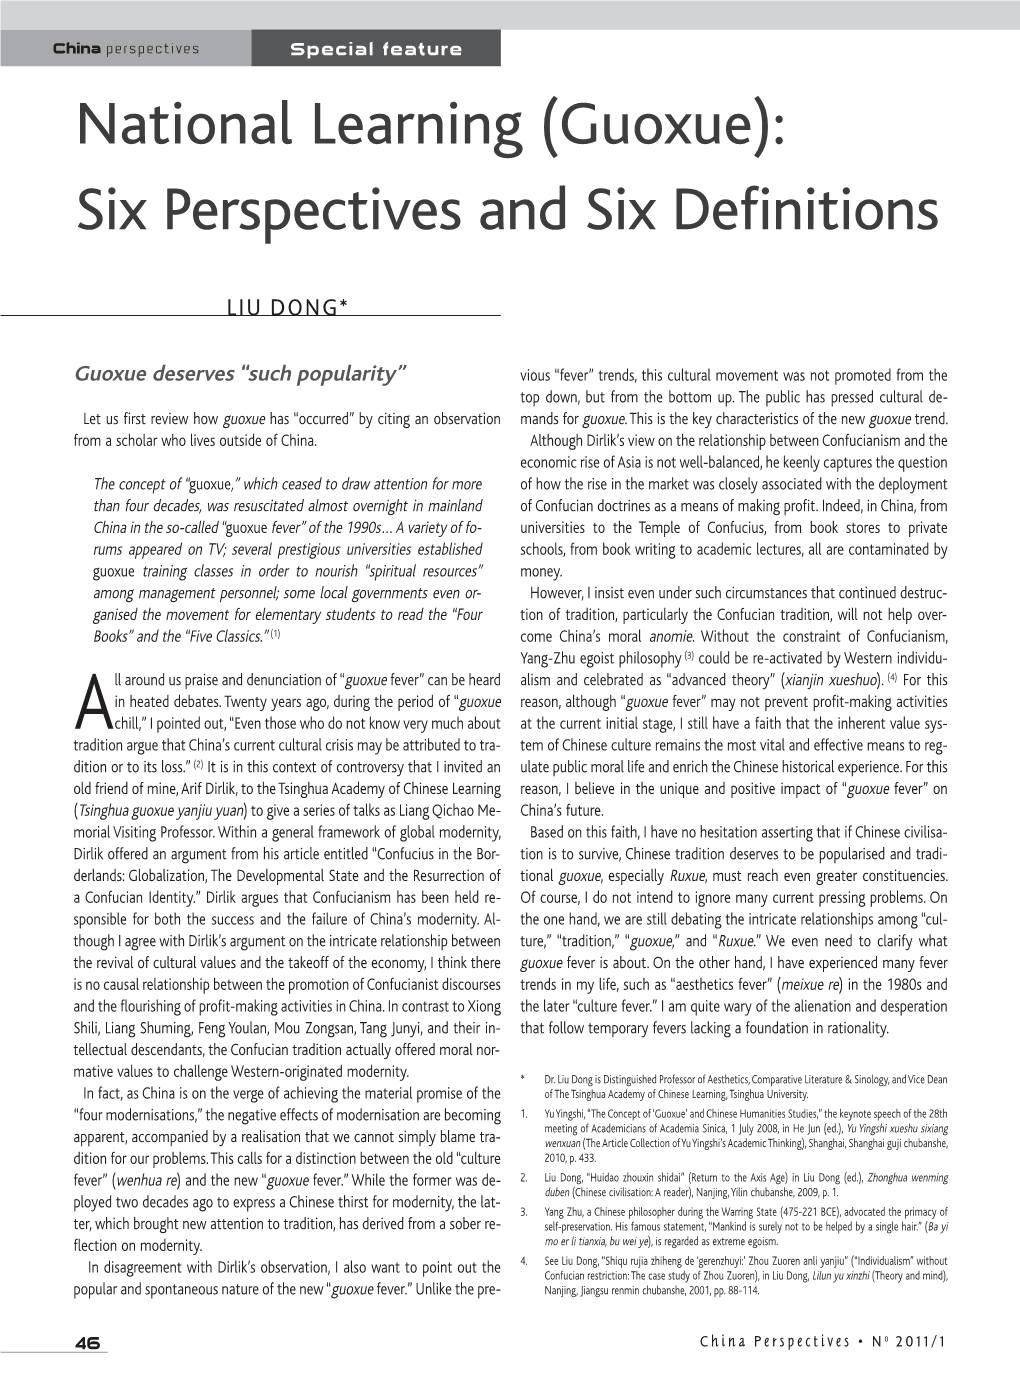 (Guoxue): Six Perspectives and Six Definitions